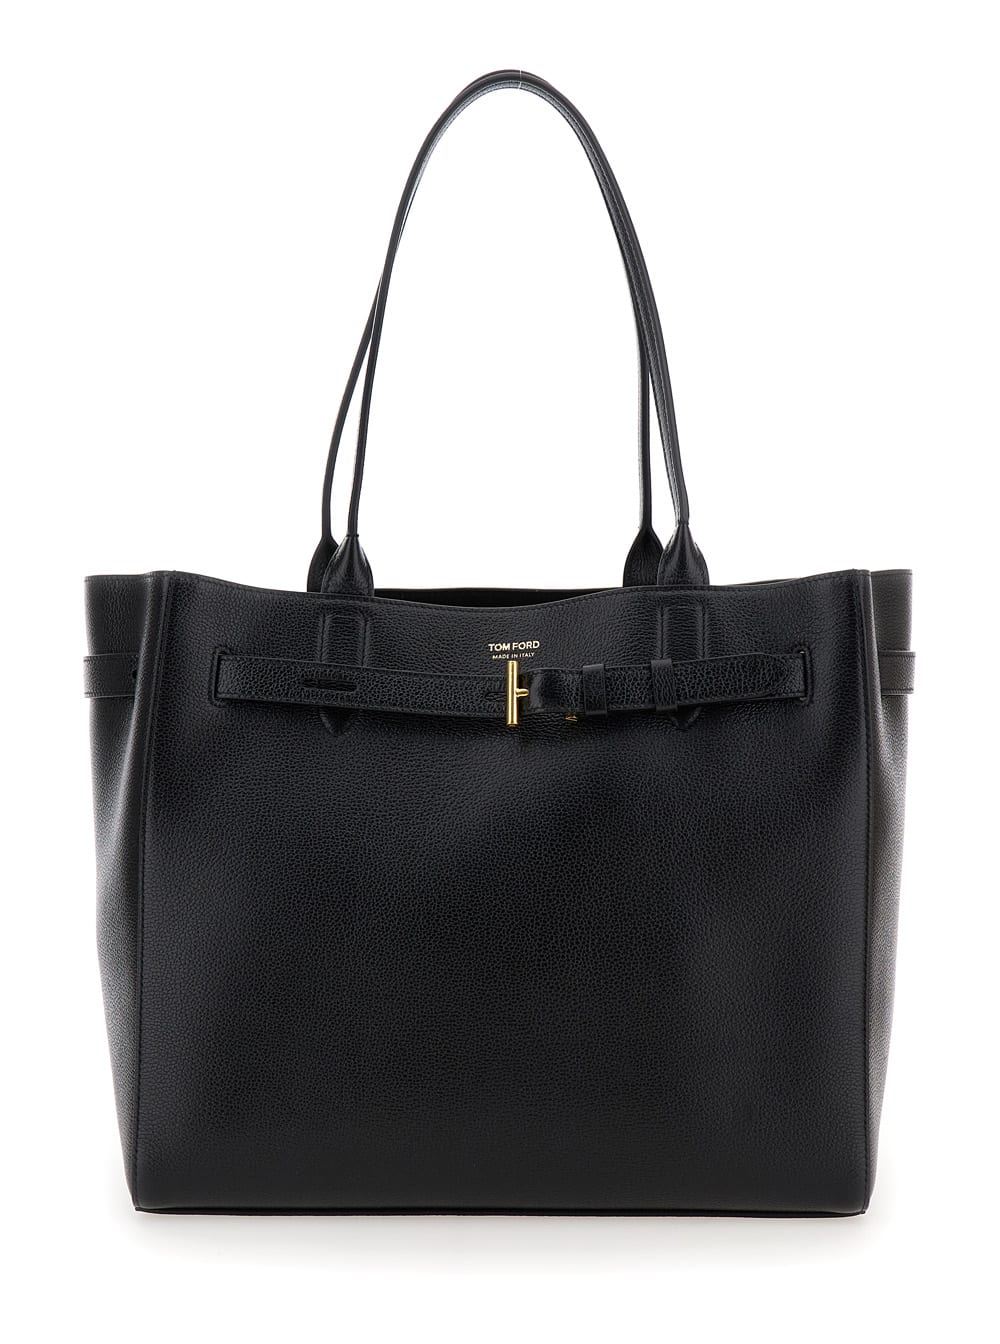 Tom Ford Black Tote Bag With T Detail In Hammered Leather Woman